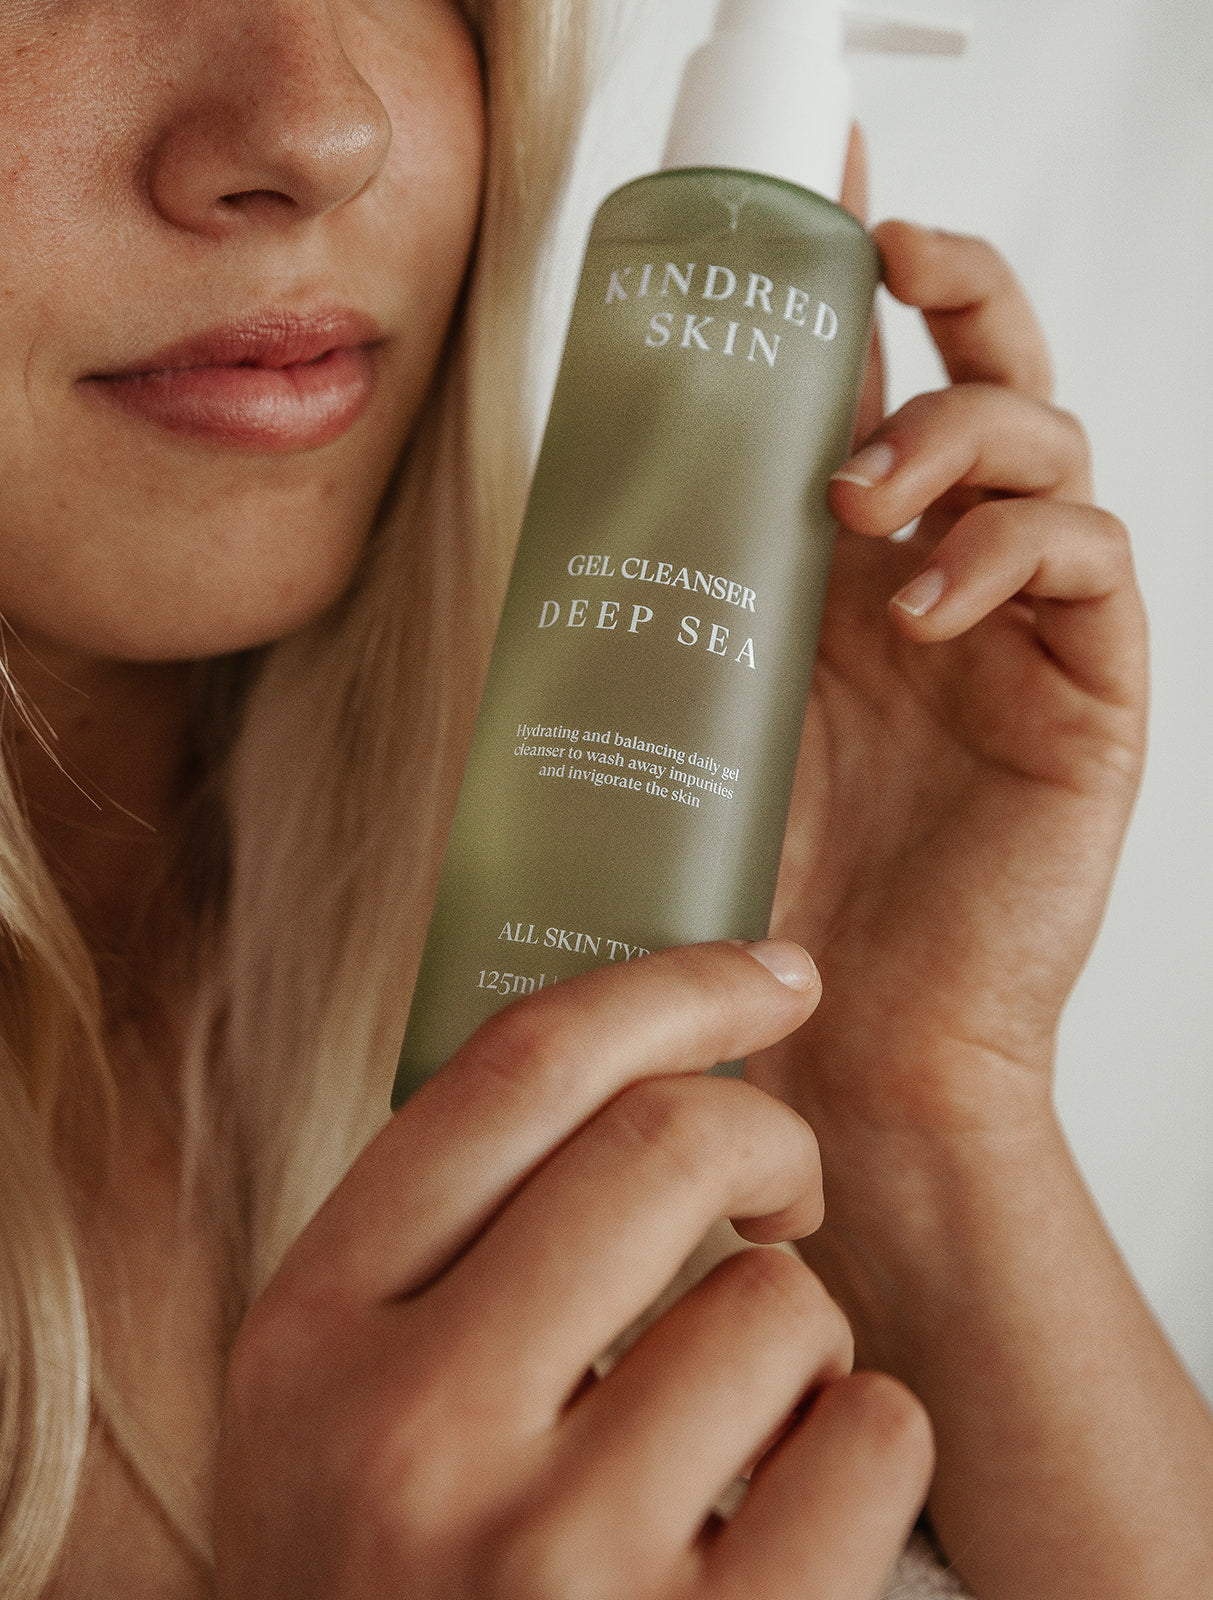 blonde pretty girl with no acne holding a green kindred skincare deep sea gel cleanser bottle with a bamboo bath towel